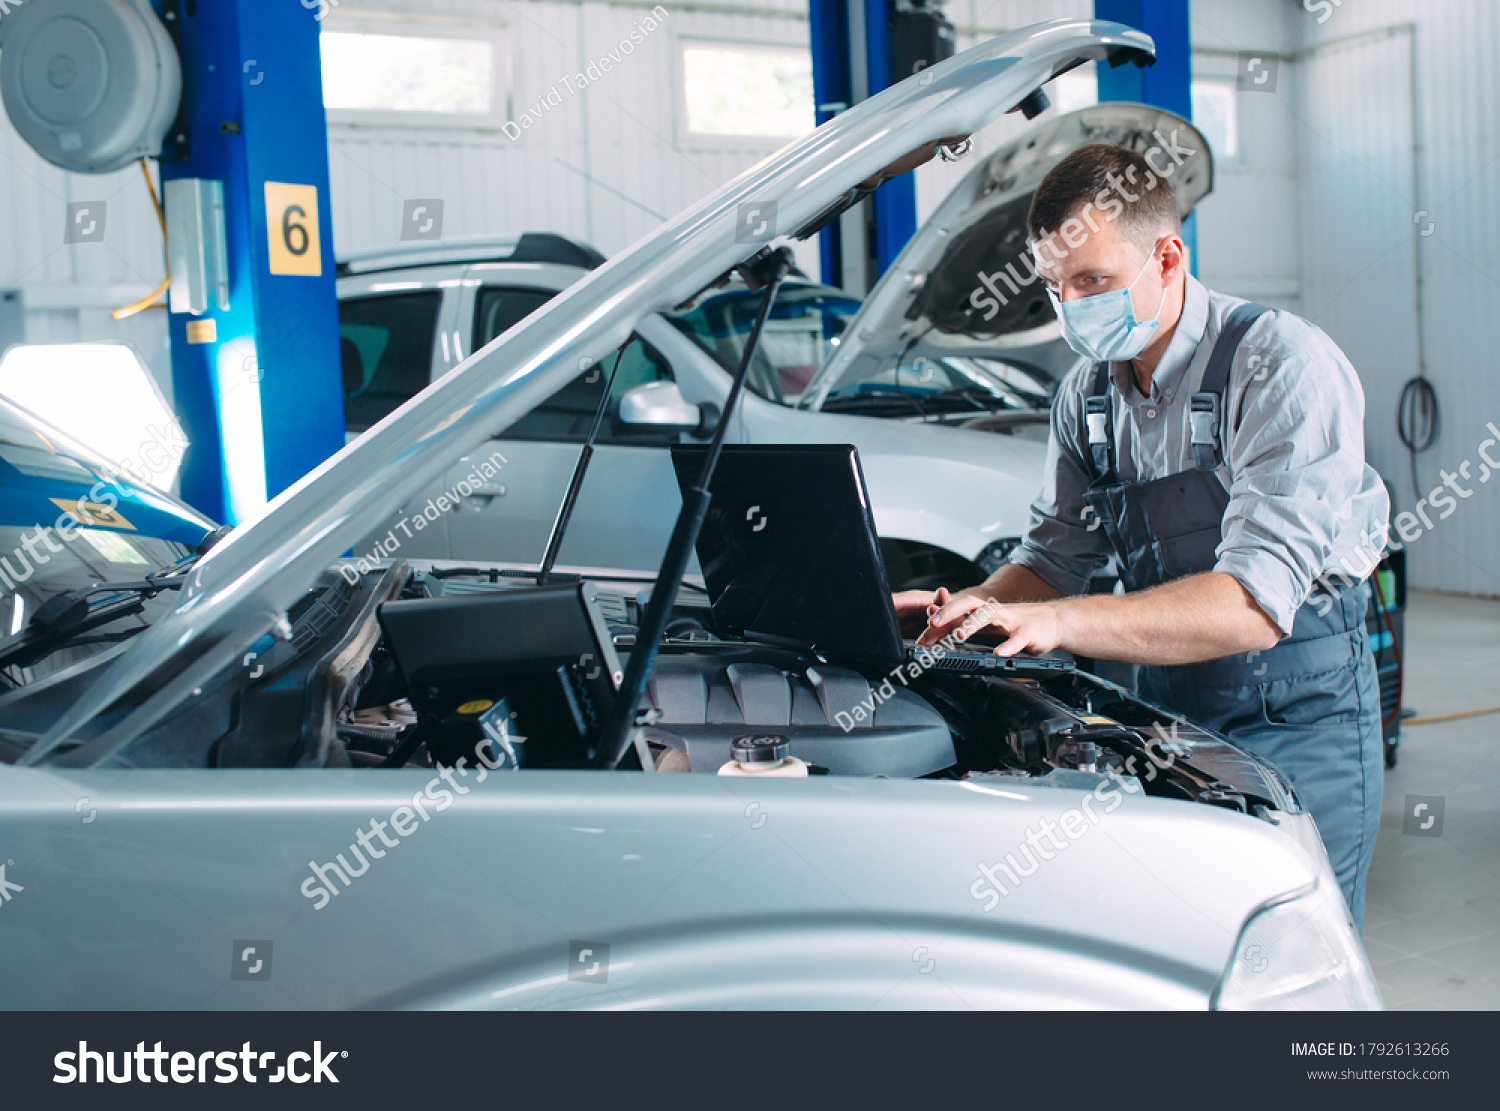 car mechanic using a computer laptop to diagnosing and checking up on car engines parts for fixing and repair #1792613266